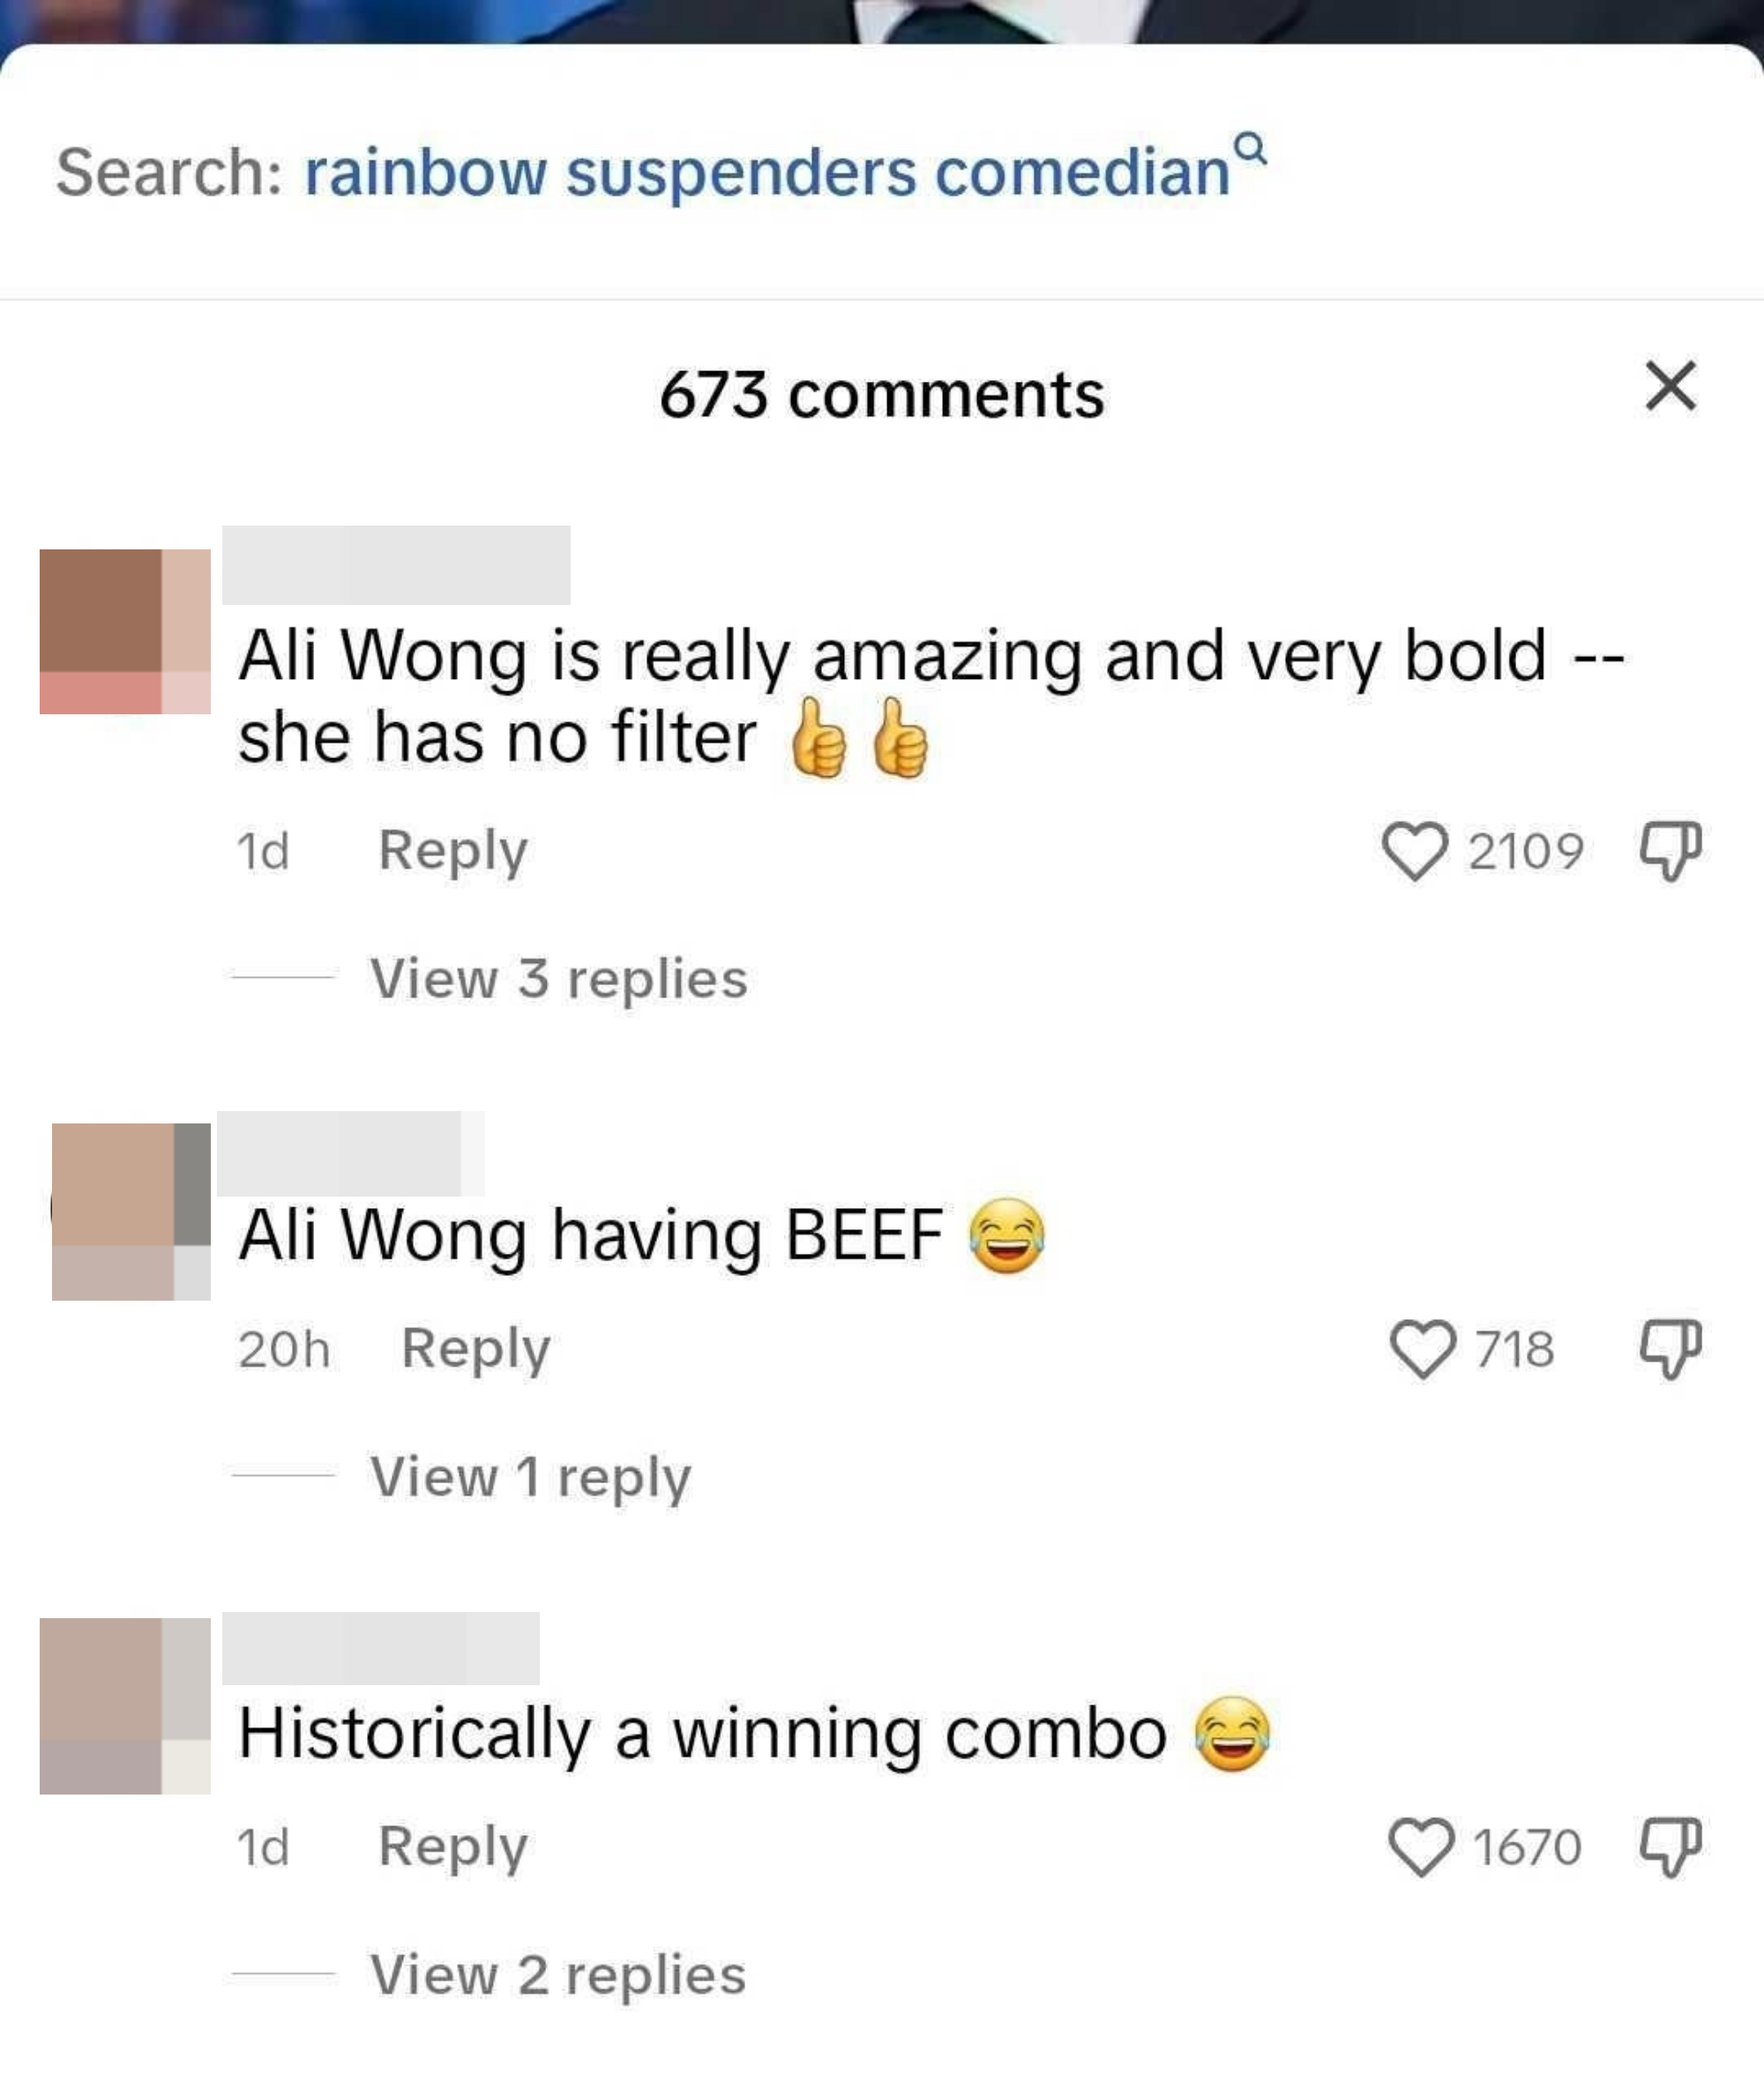 One person said &quot;Ali Wong having BEEF&quot; with a laughing, crying emoji